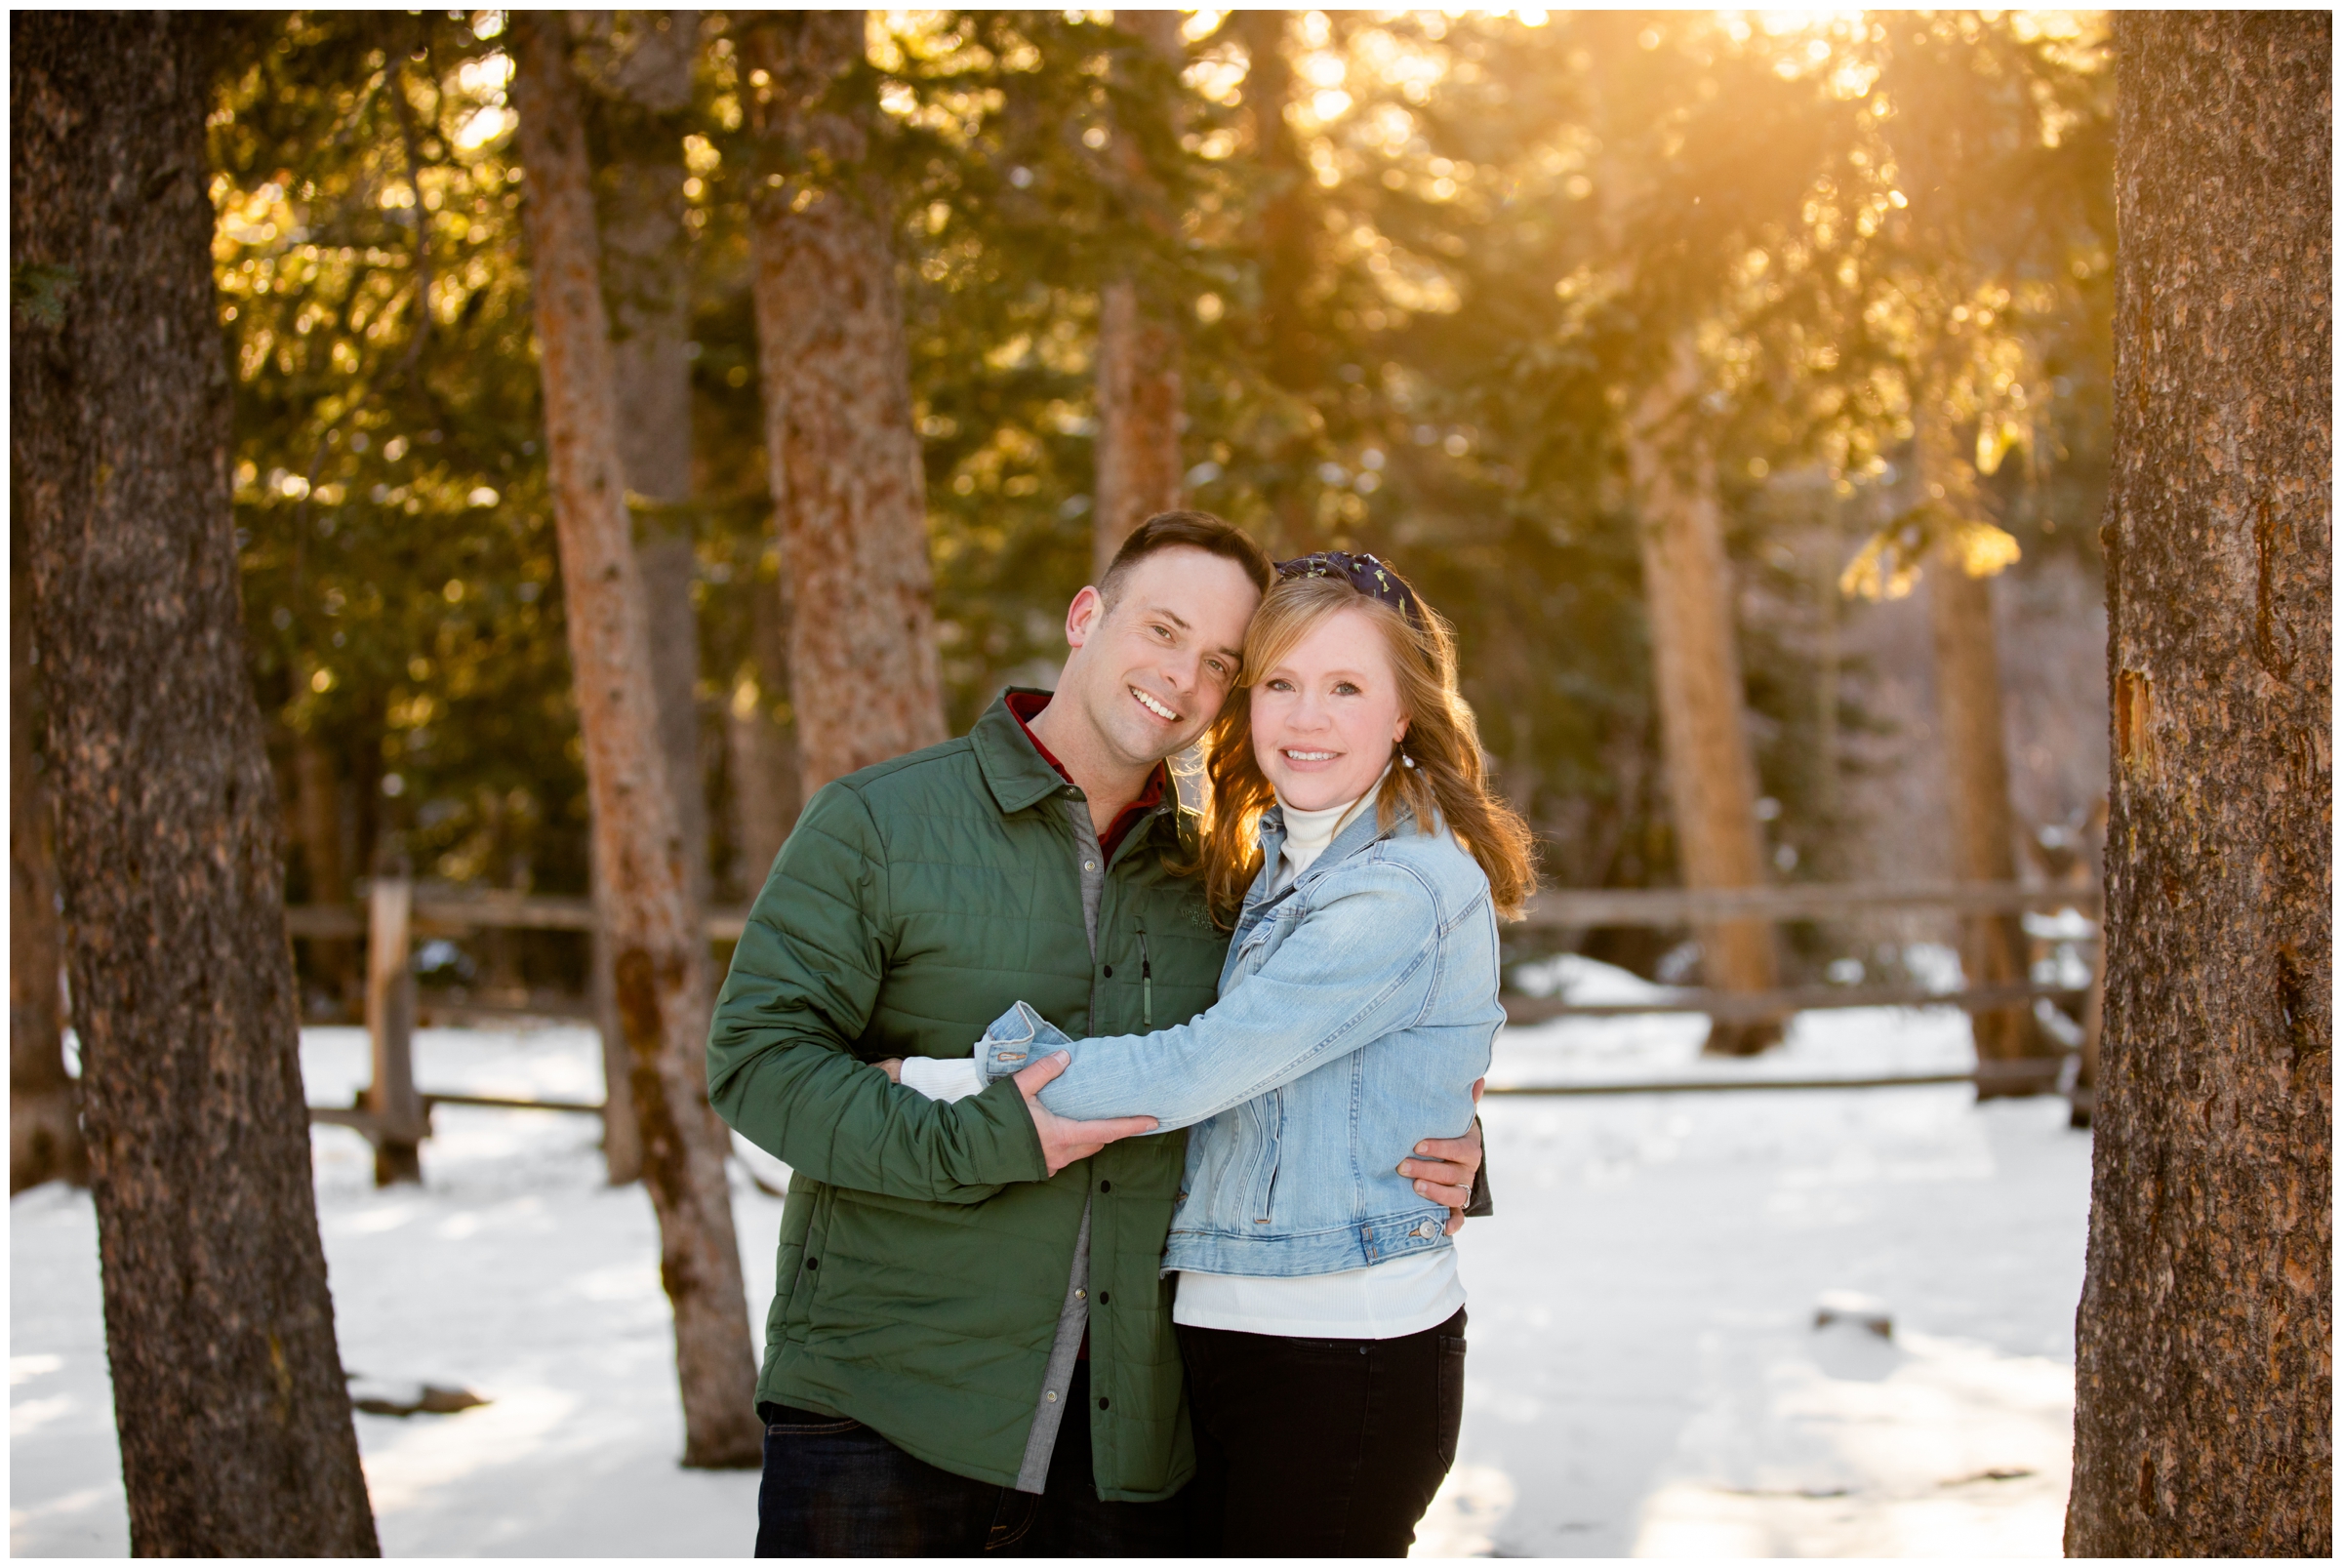 Snowy Idaho Springs couples photos at Echo Lake by Colorado wedding and portrait photographer Plum Pretty Photography